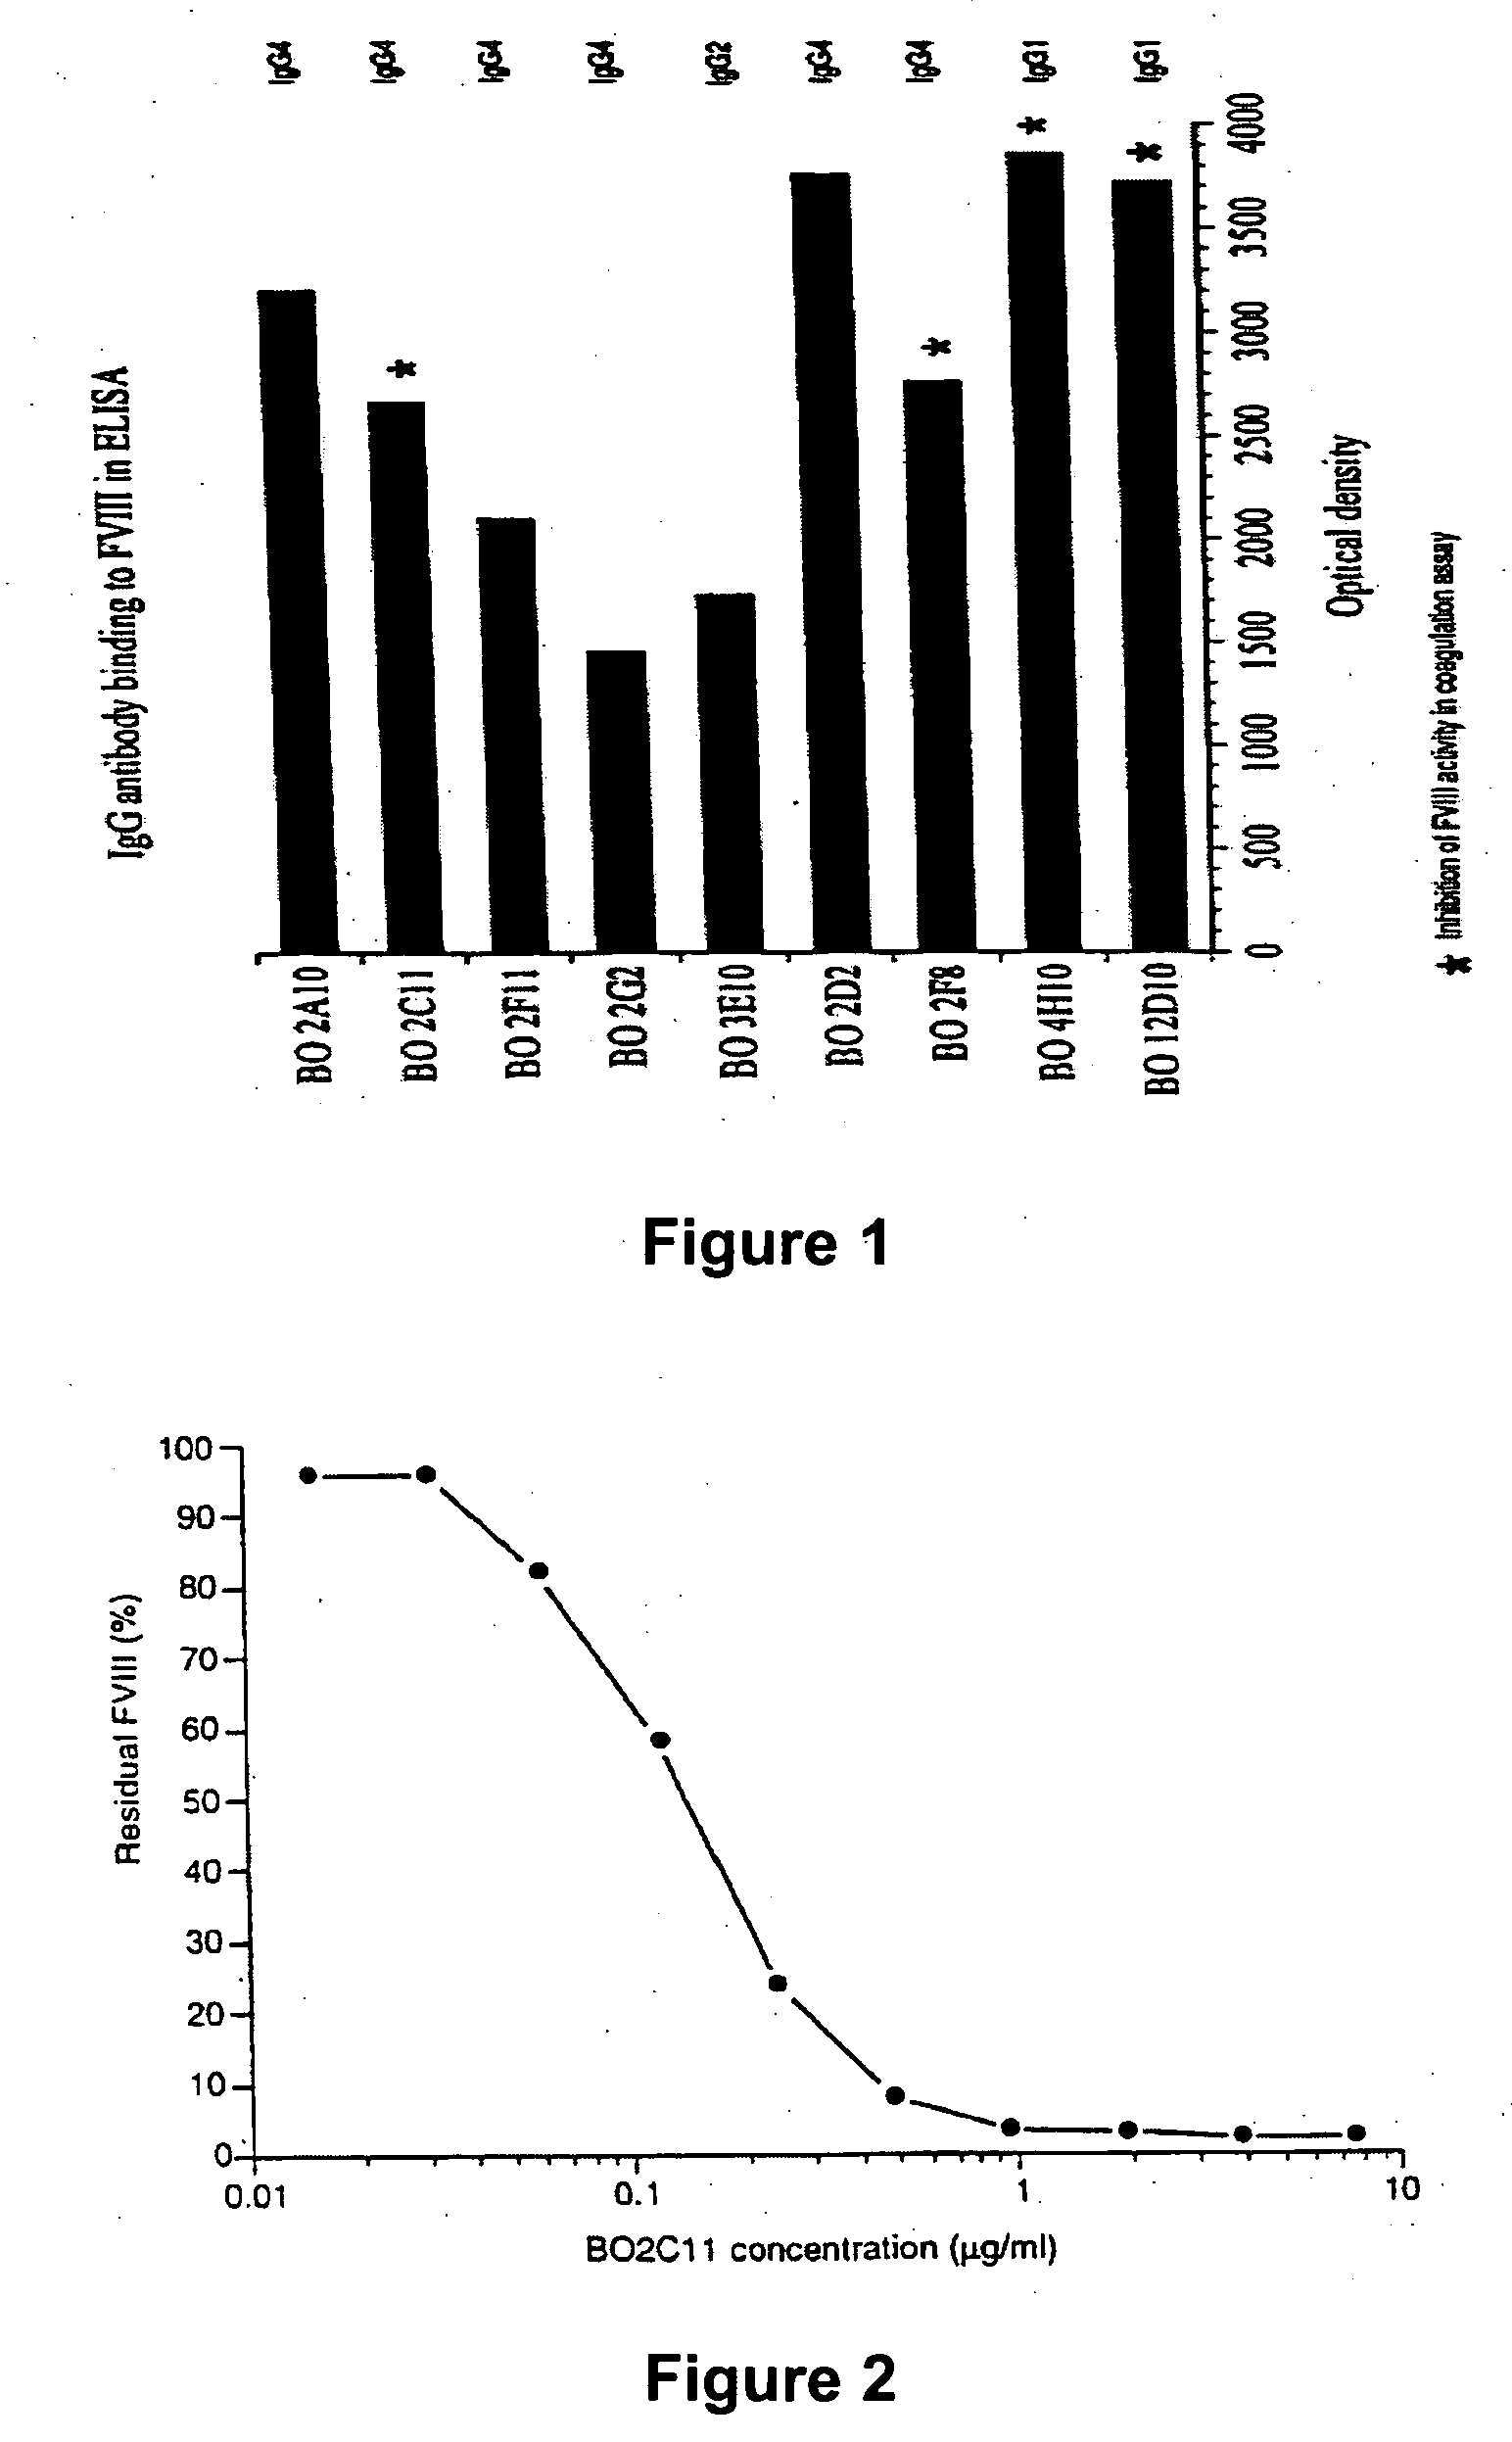 Ligands for use in therapeutic compositions for the treatment of hemostasis disorders